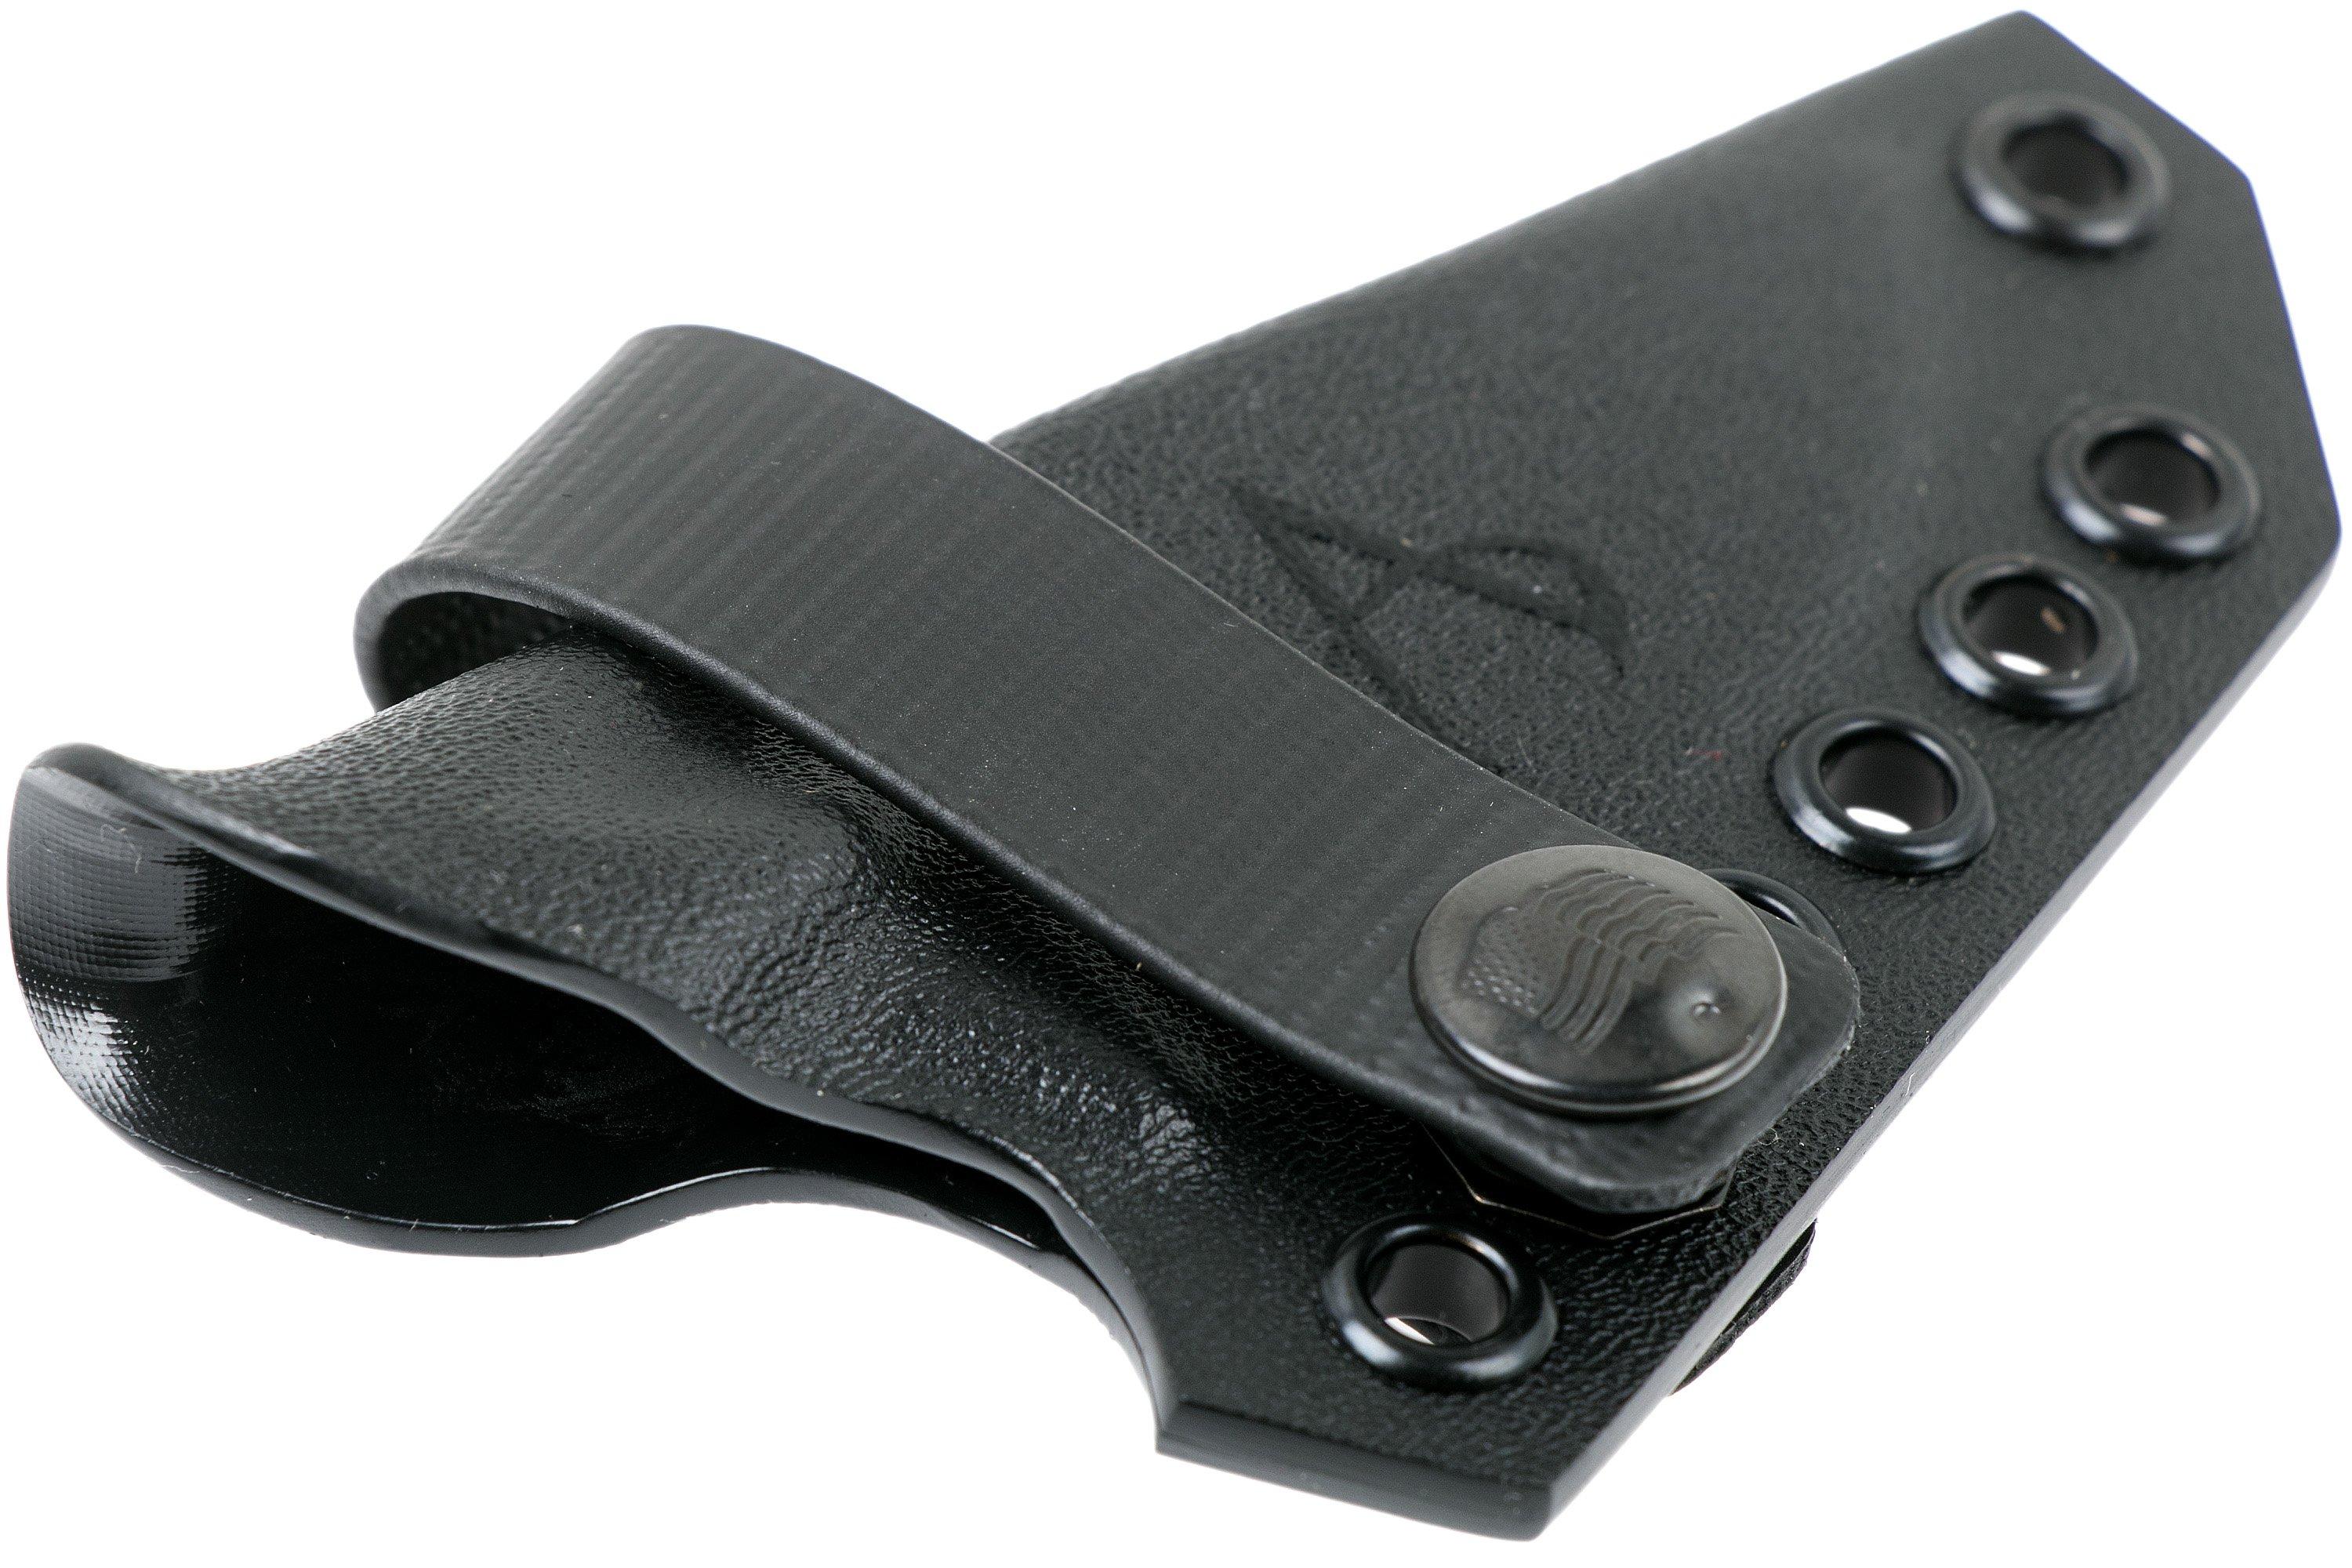 Armatus Carry Architect sheath for the Benchmade Hidden Canyon DW ...